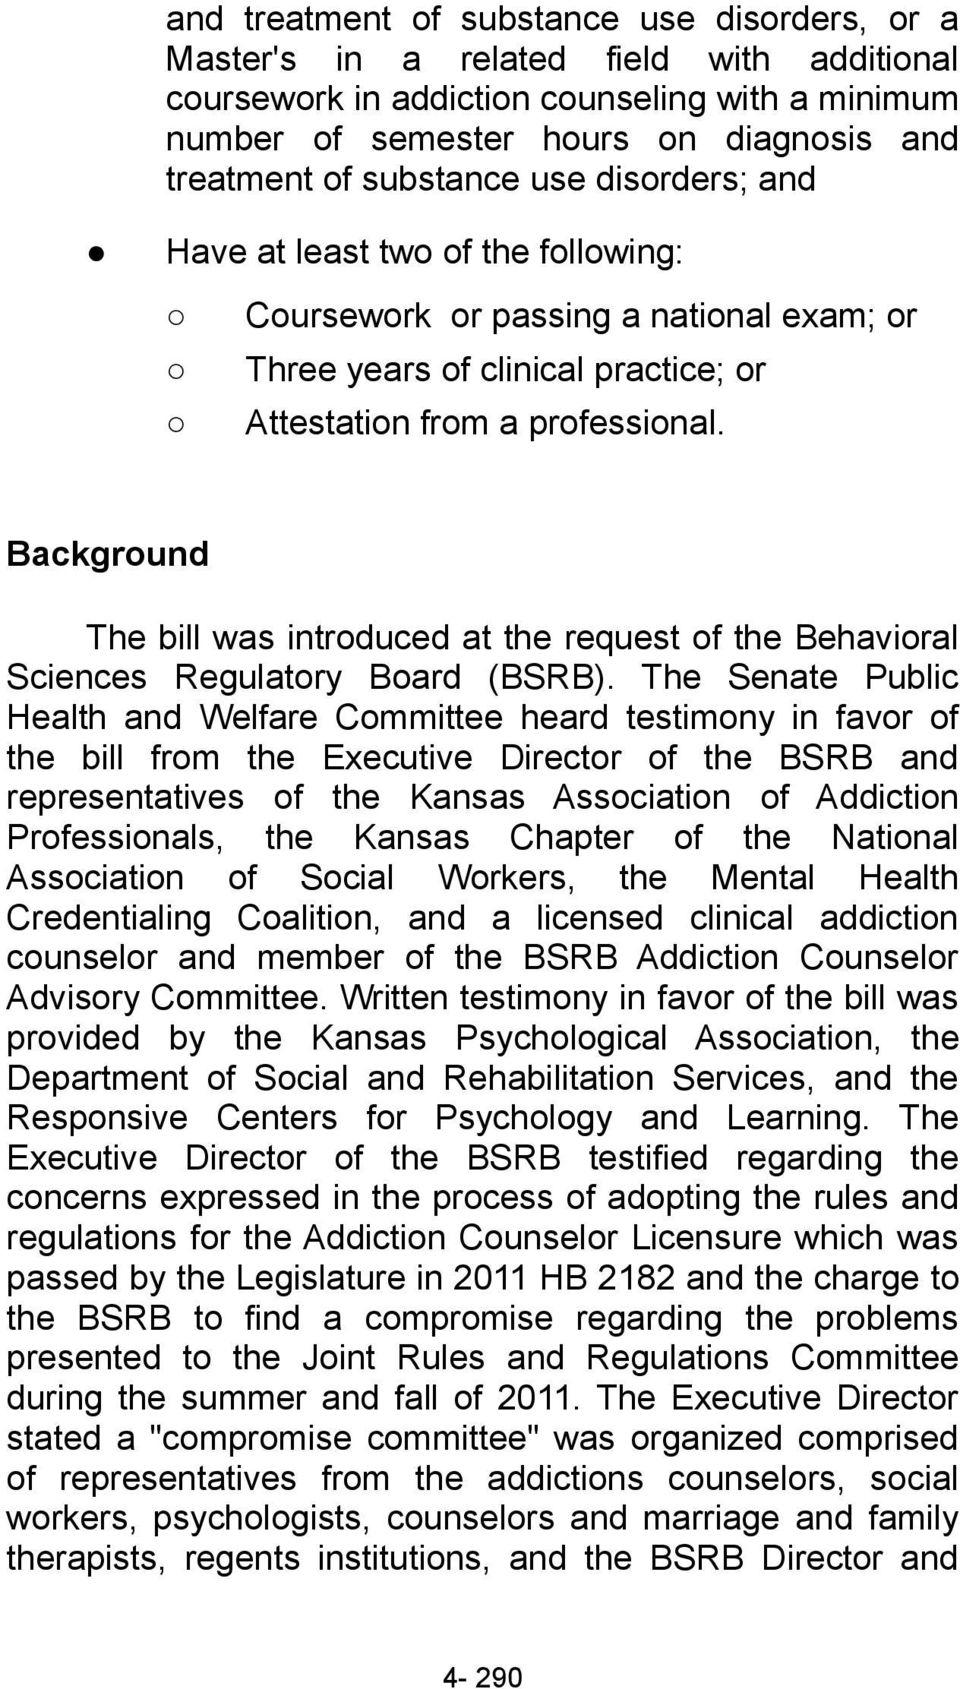 Background The bill was introduced at the request of the Behavioral Sciences Regulatory Board (BSRB).